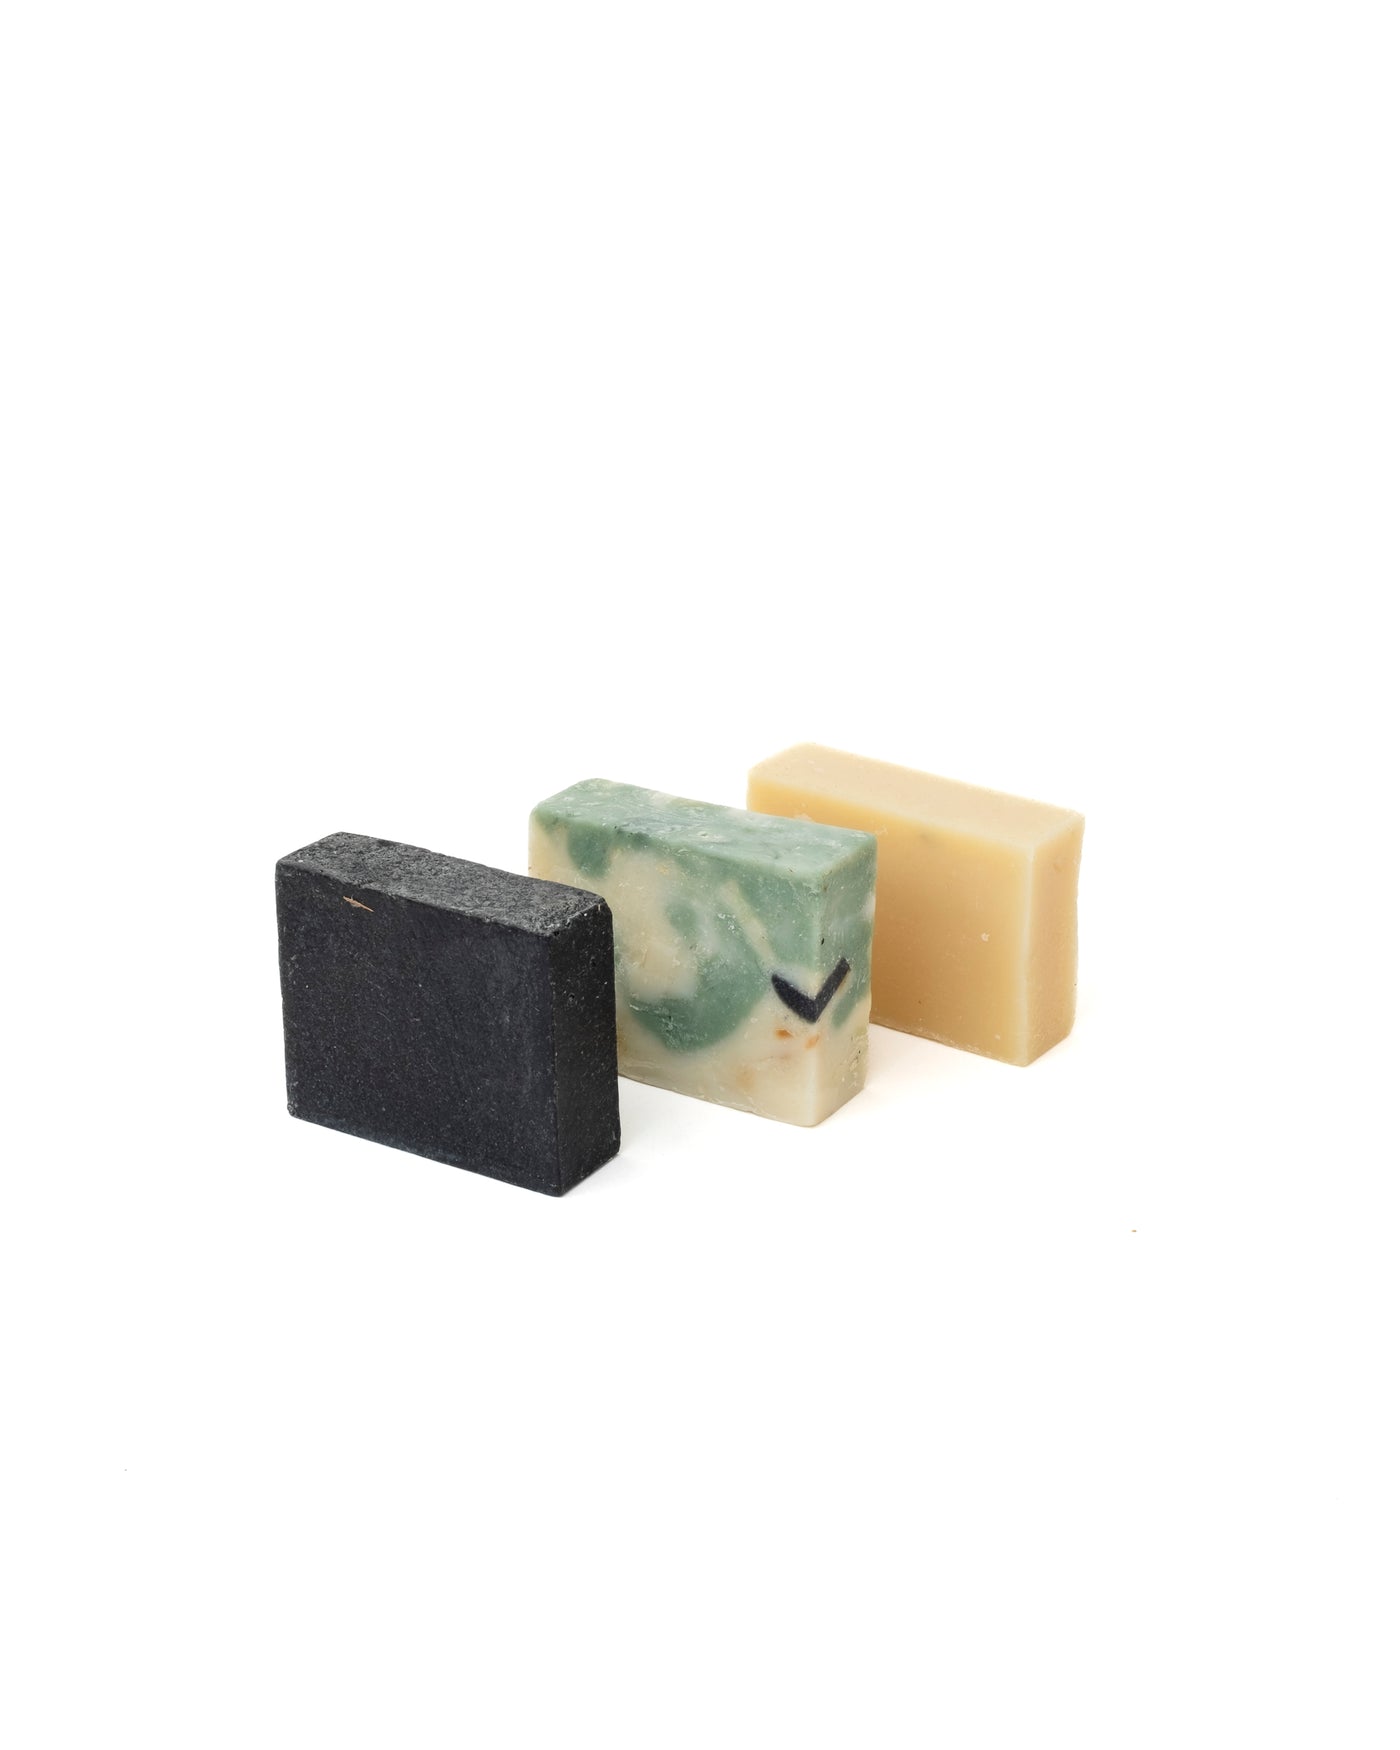 Three By One Ginger & Lemongrass Cleansing Bar for face & body